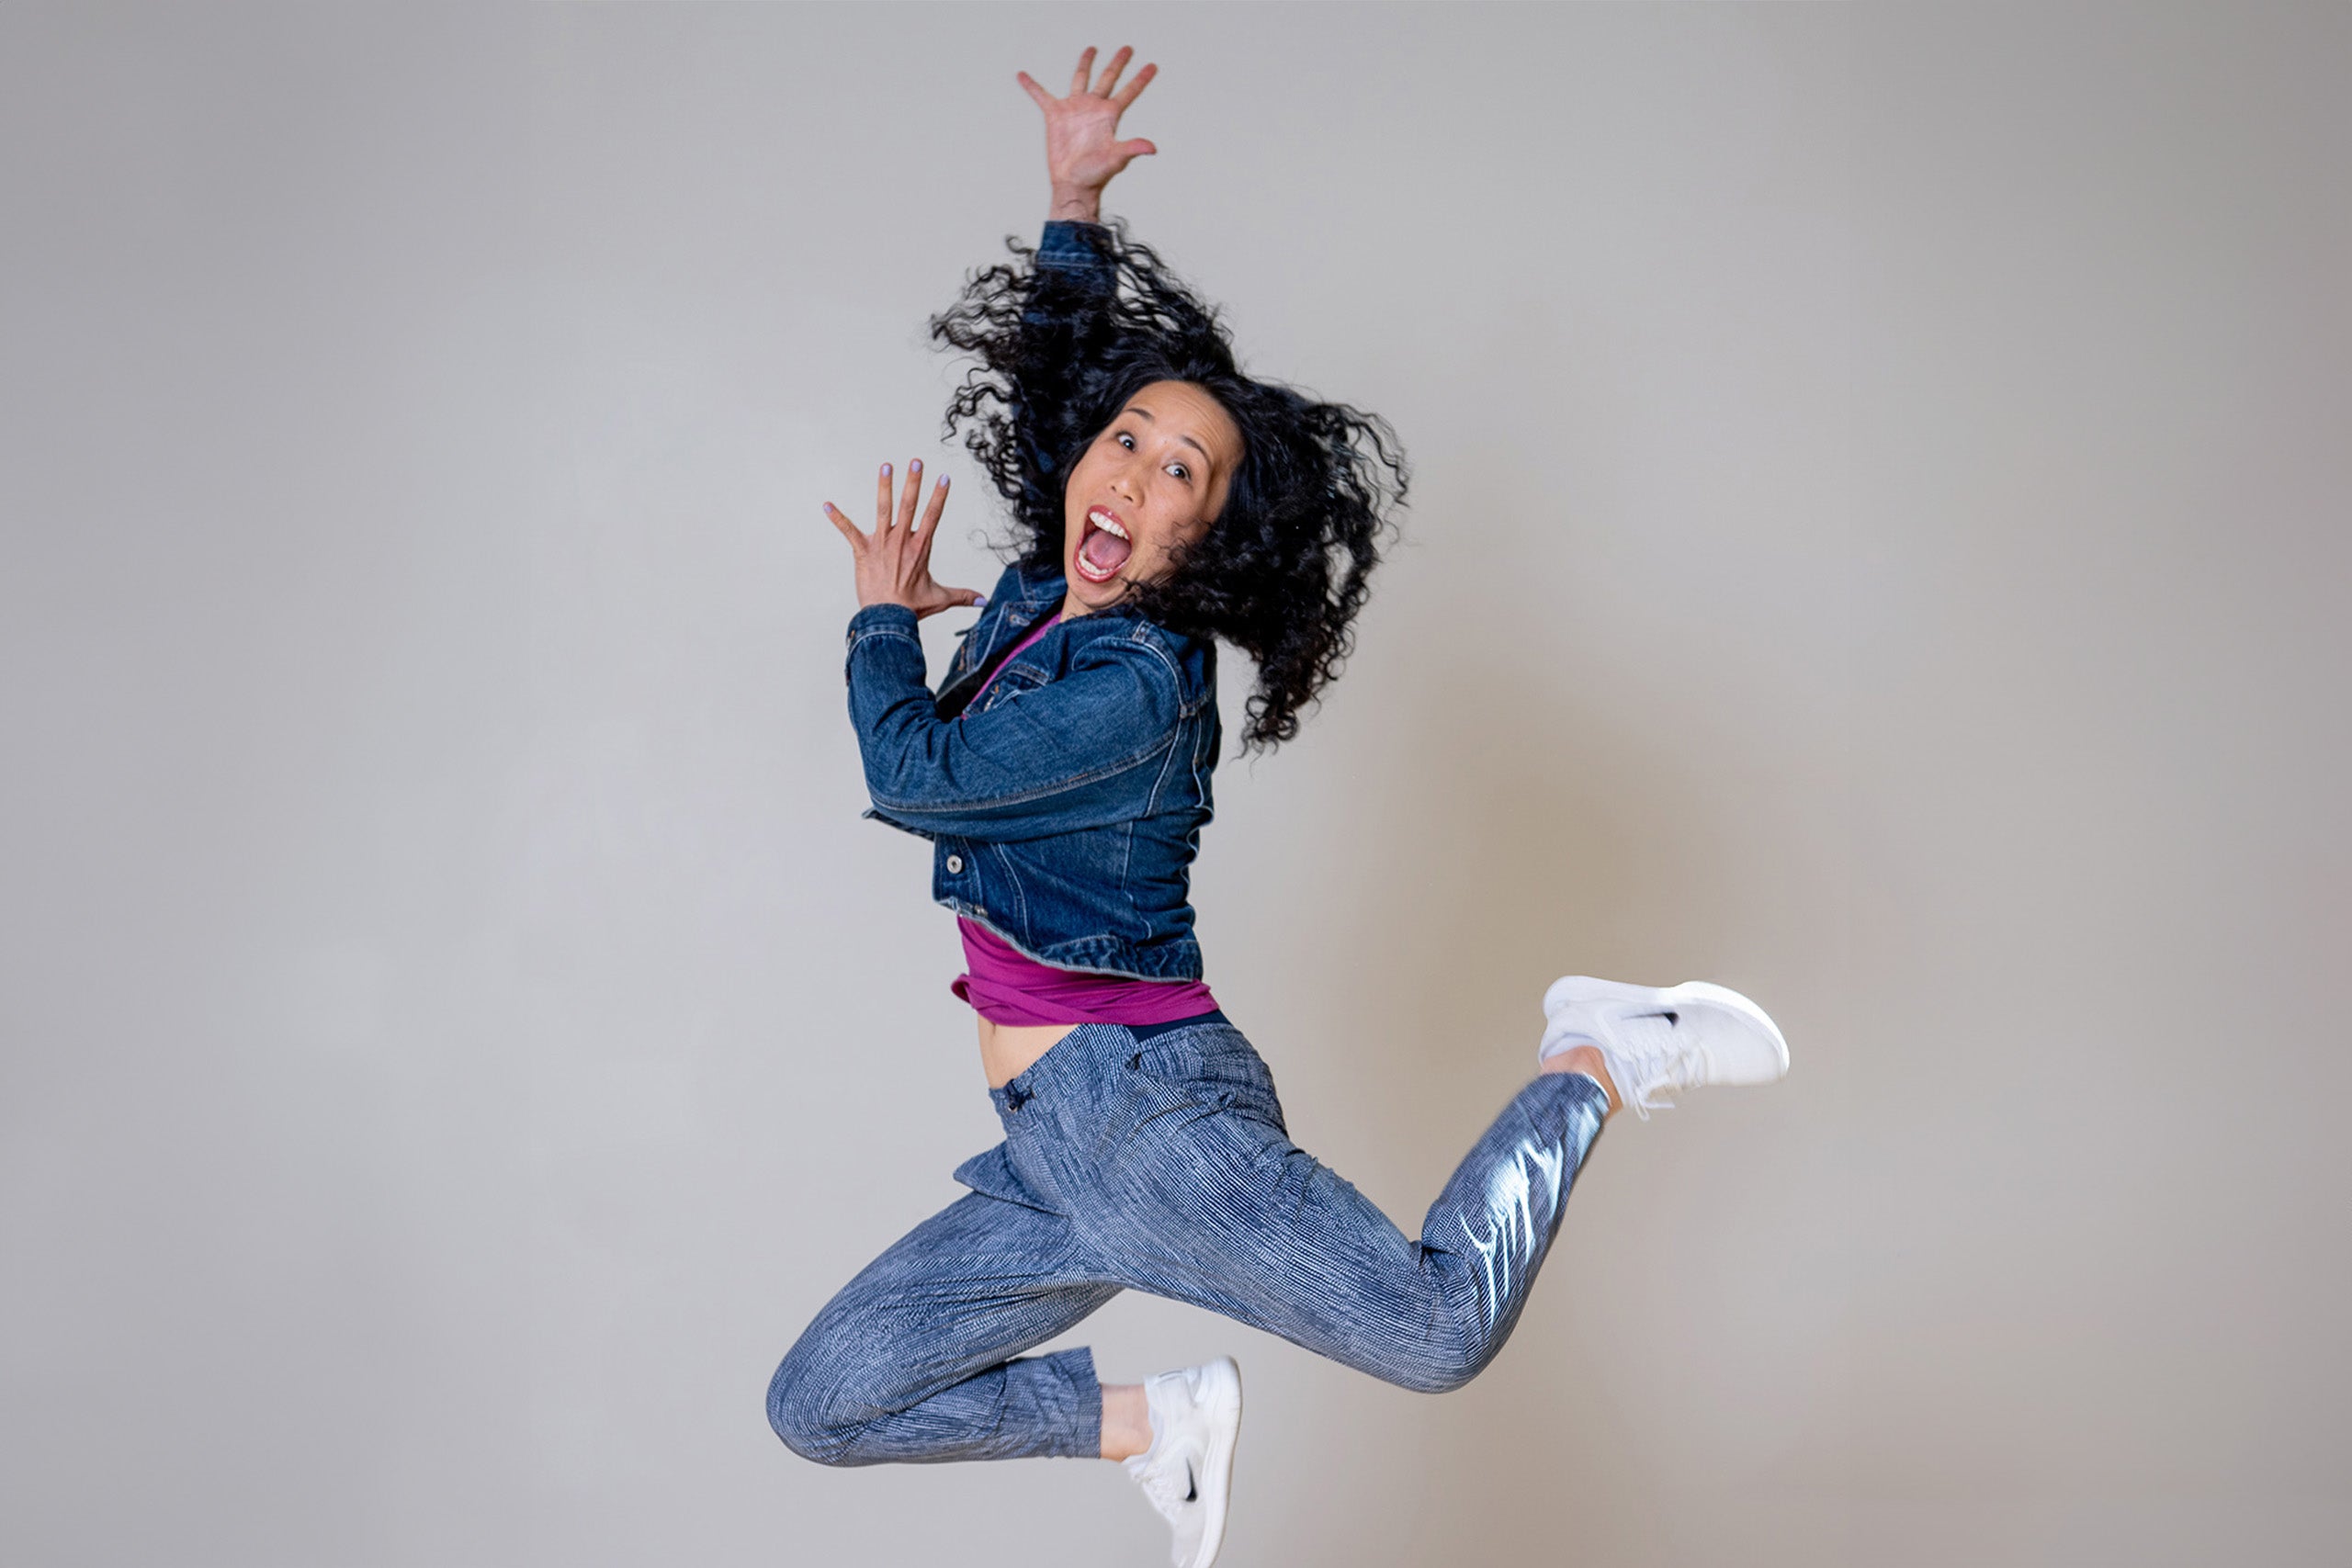 cool looking hip-hop dancer posing on old wall - Stock Image - Everypixel